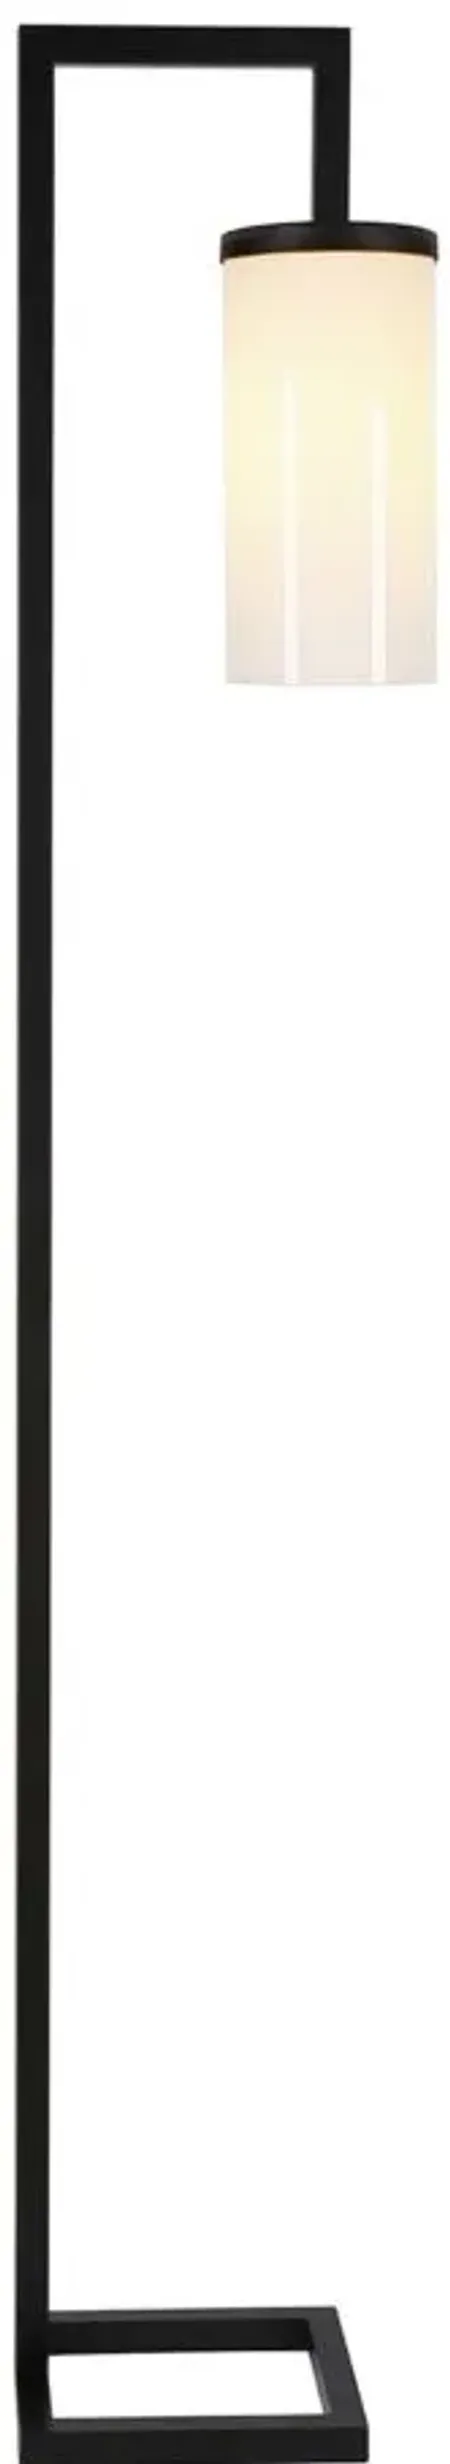 Ansa White Cylinder Floor Lamp in Blackened Bronze by Hudson & Canal